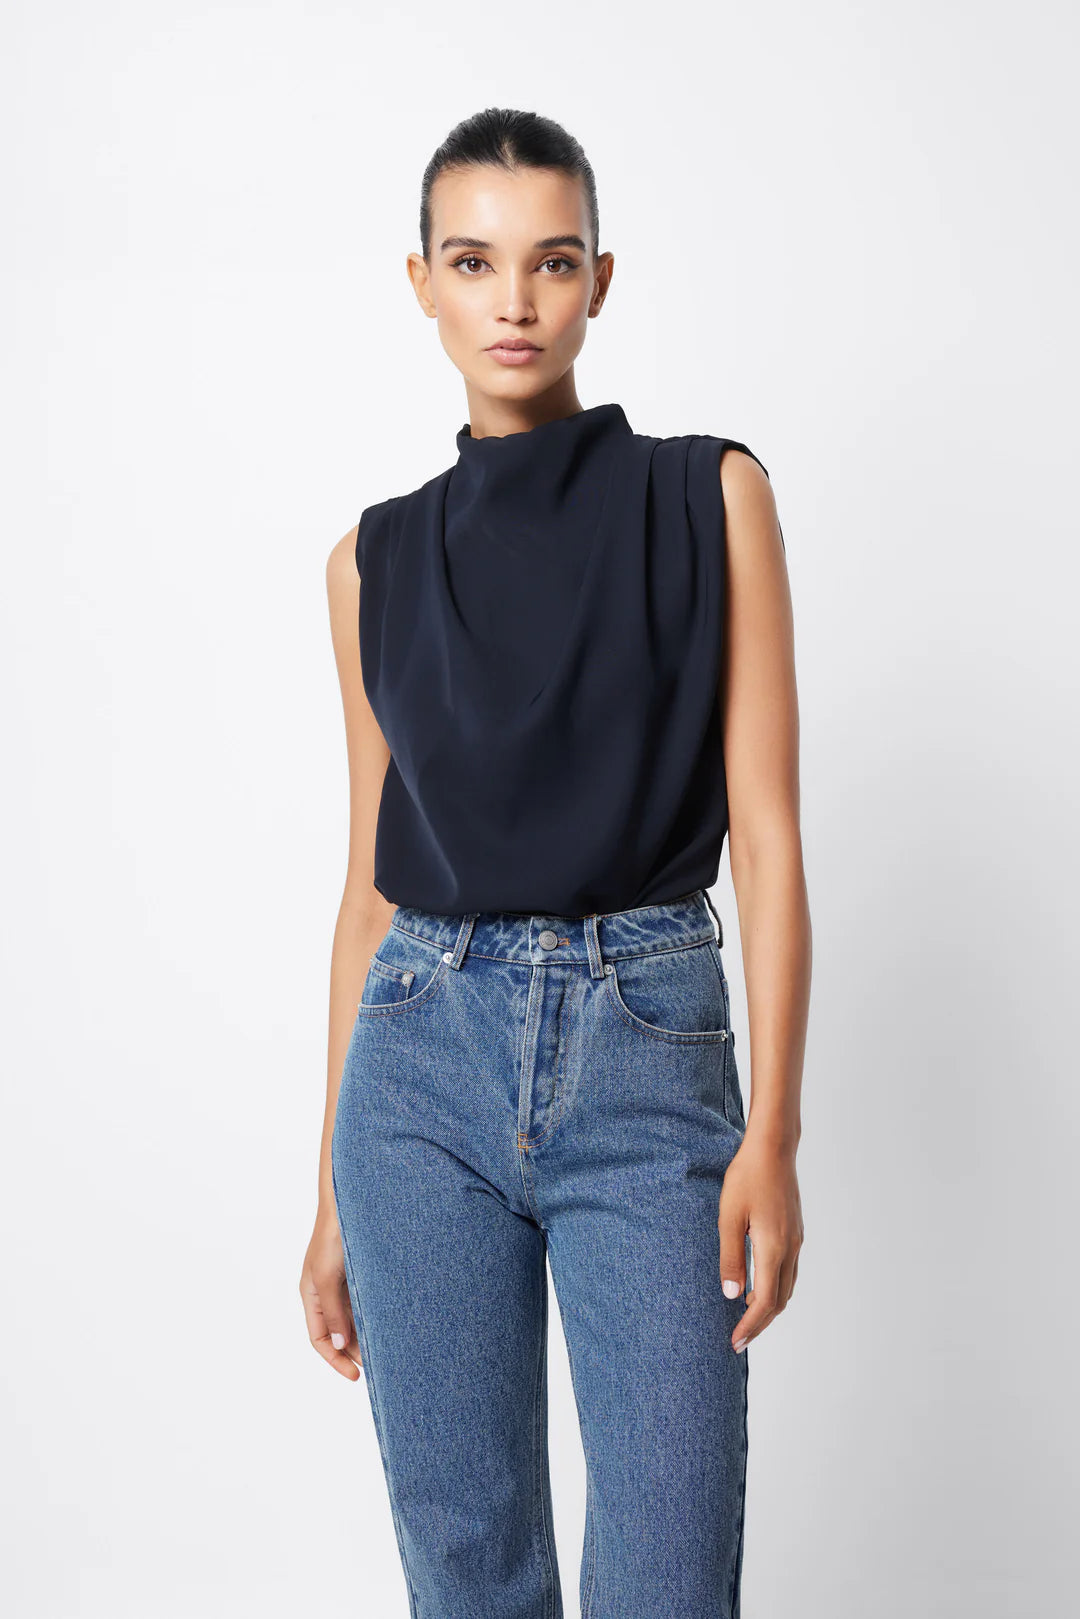 The Dare To Dream Top, navy